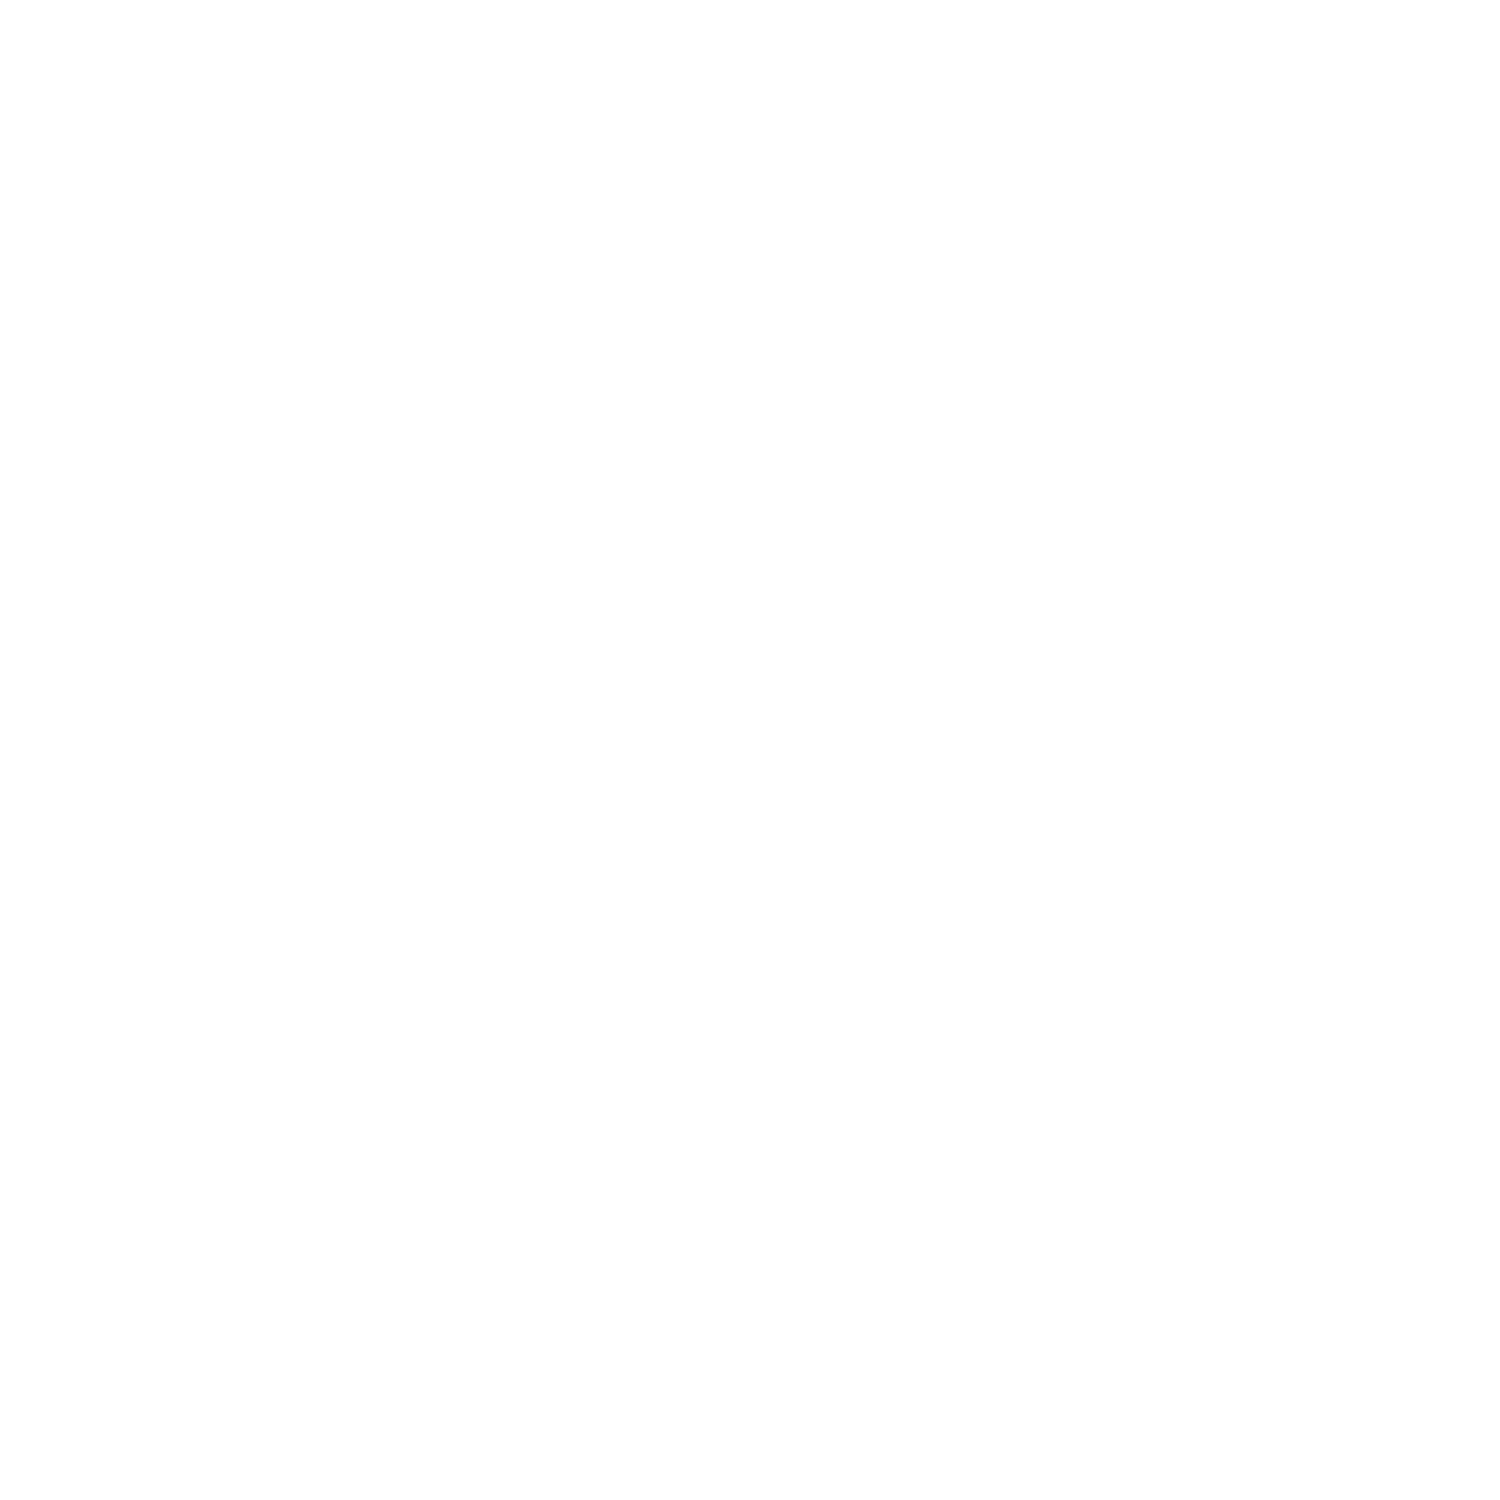 WE ARE NOW